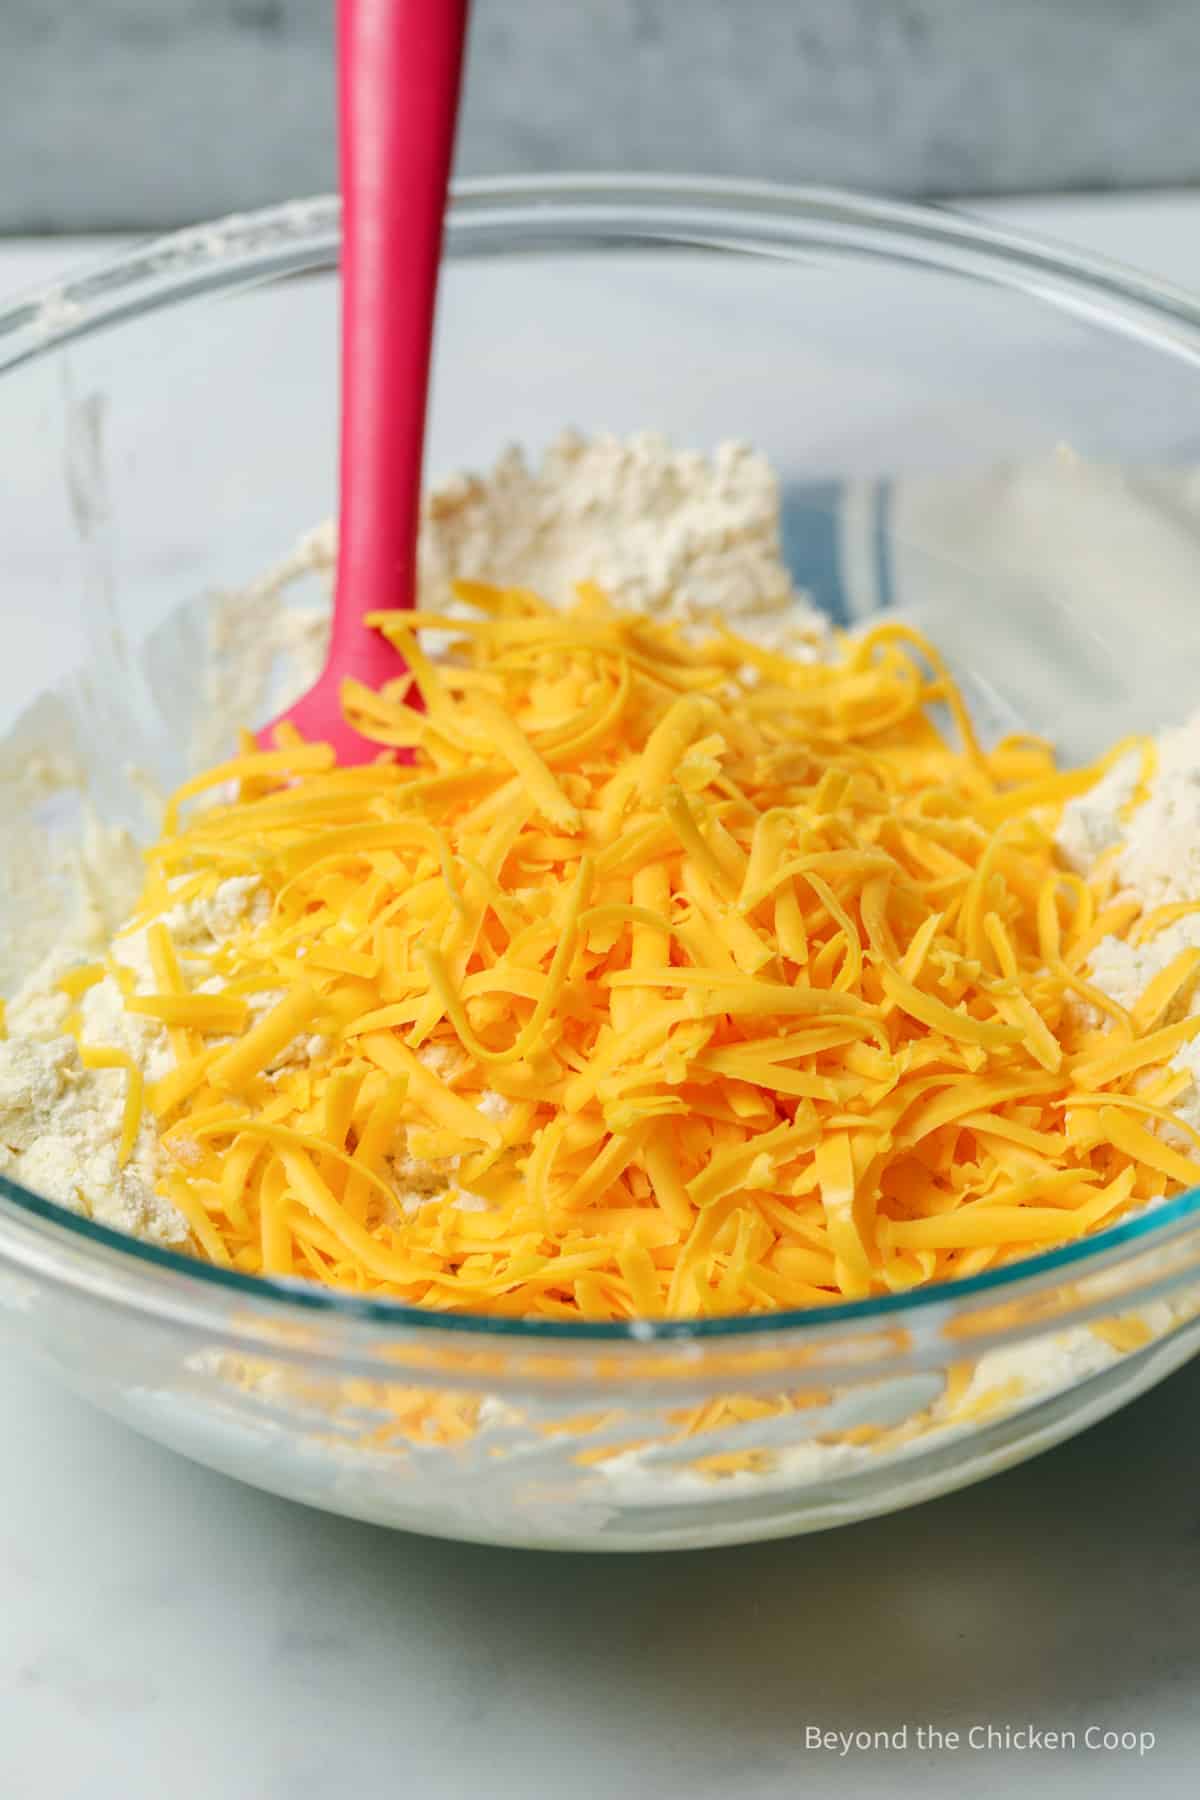 Shredded cheese in a large mixing bowl.